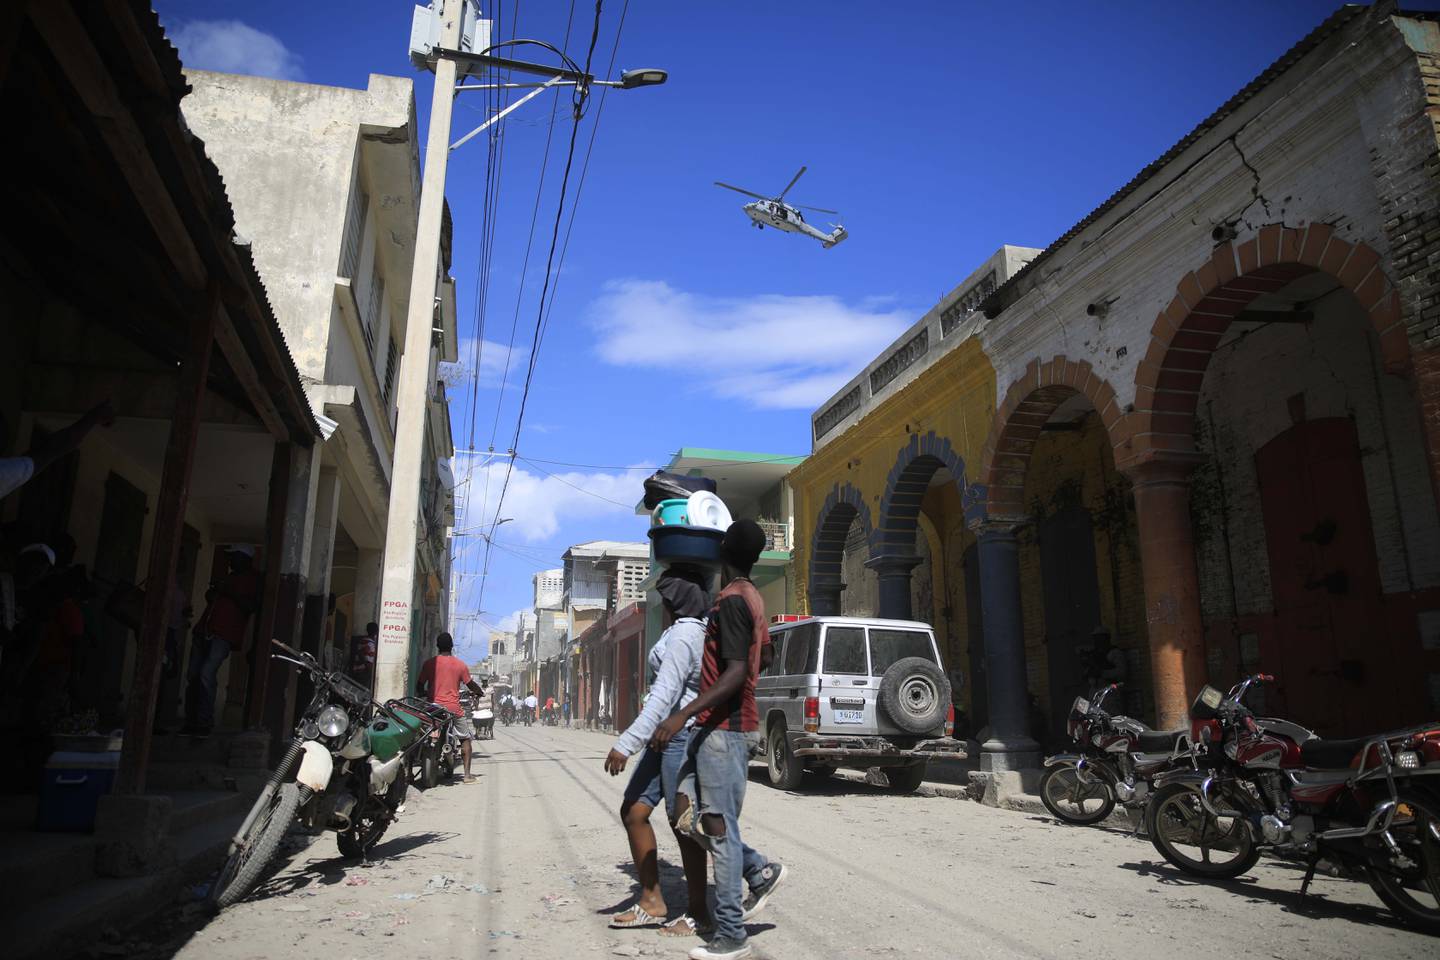 A USN helicopter flies overhead during a protest against the arrival of the USNS Comfort hospital ship in Jeremie, Haiti, Tuesday, Dec. 13, 2022.